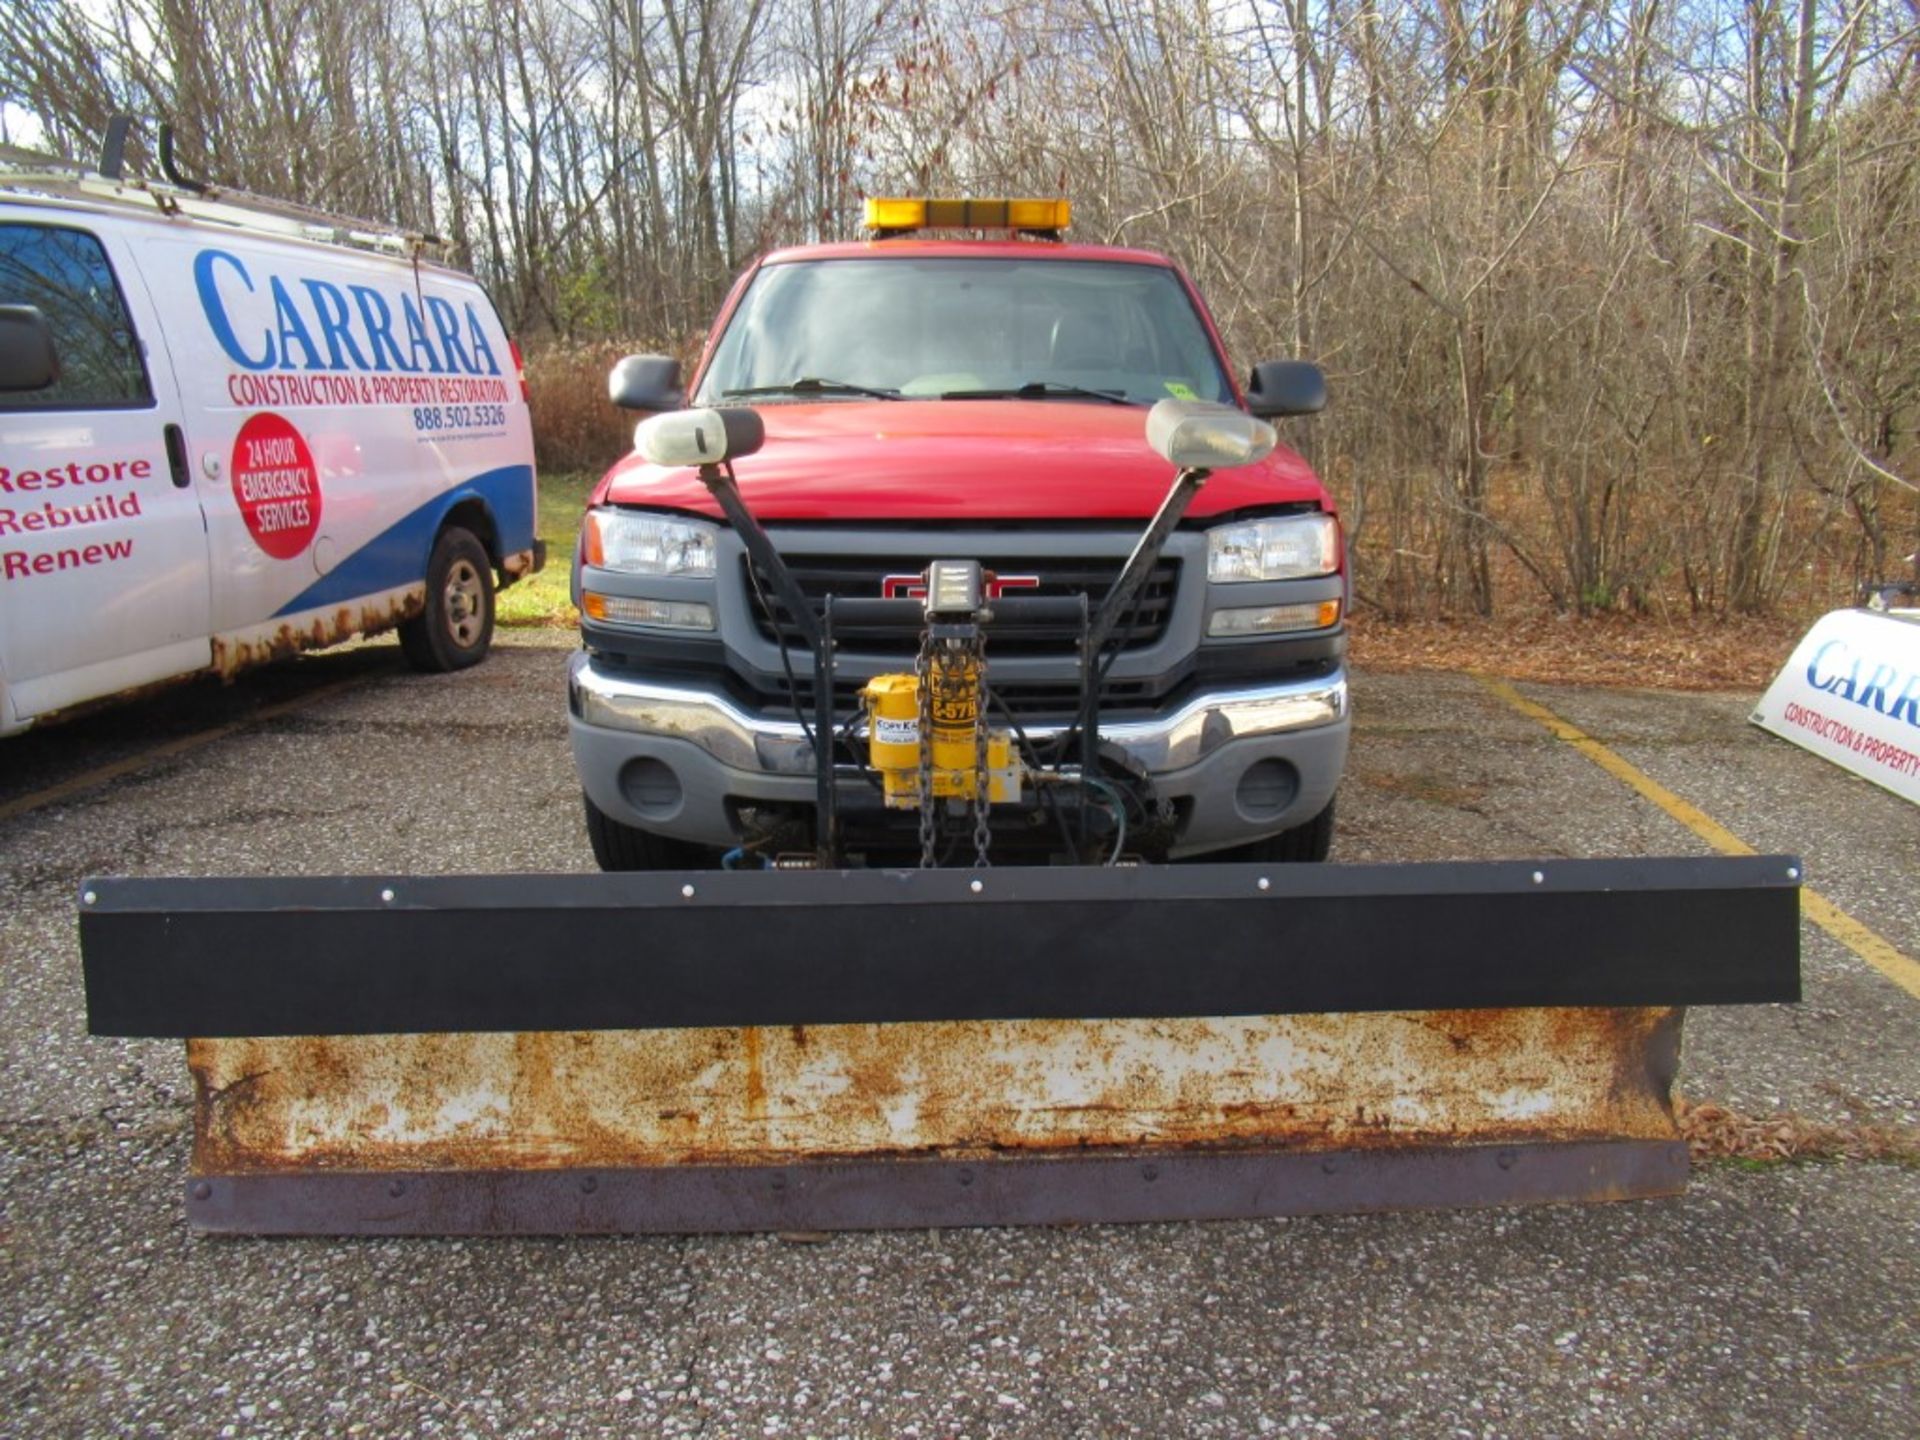 2005 GMC 2500 HD Pickup with Snow Plow, VIN 1GTHK24U05E308334, 4 WD, Automatic, AM/FM, Started - Image 3 of 37